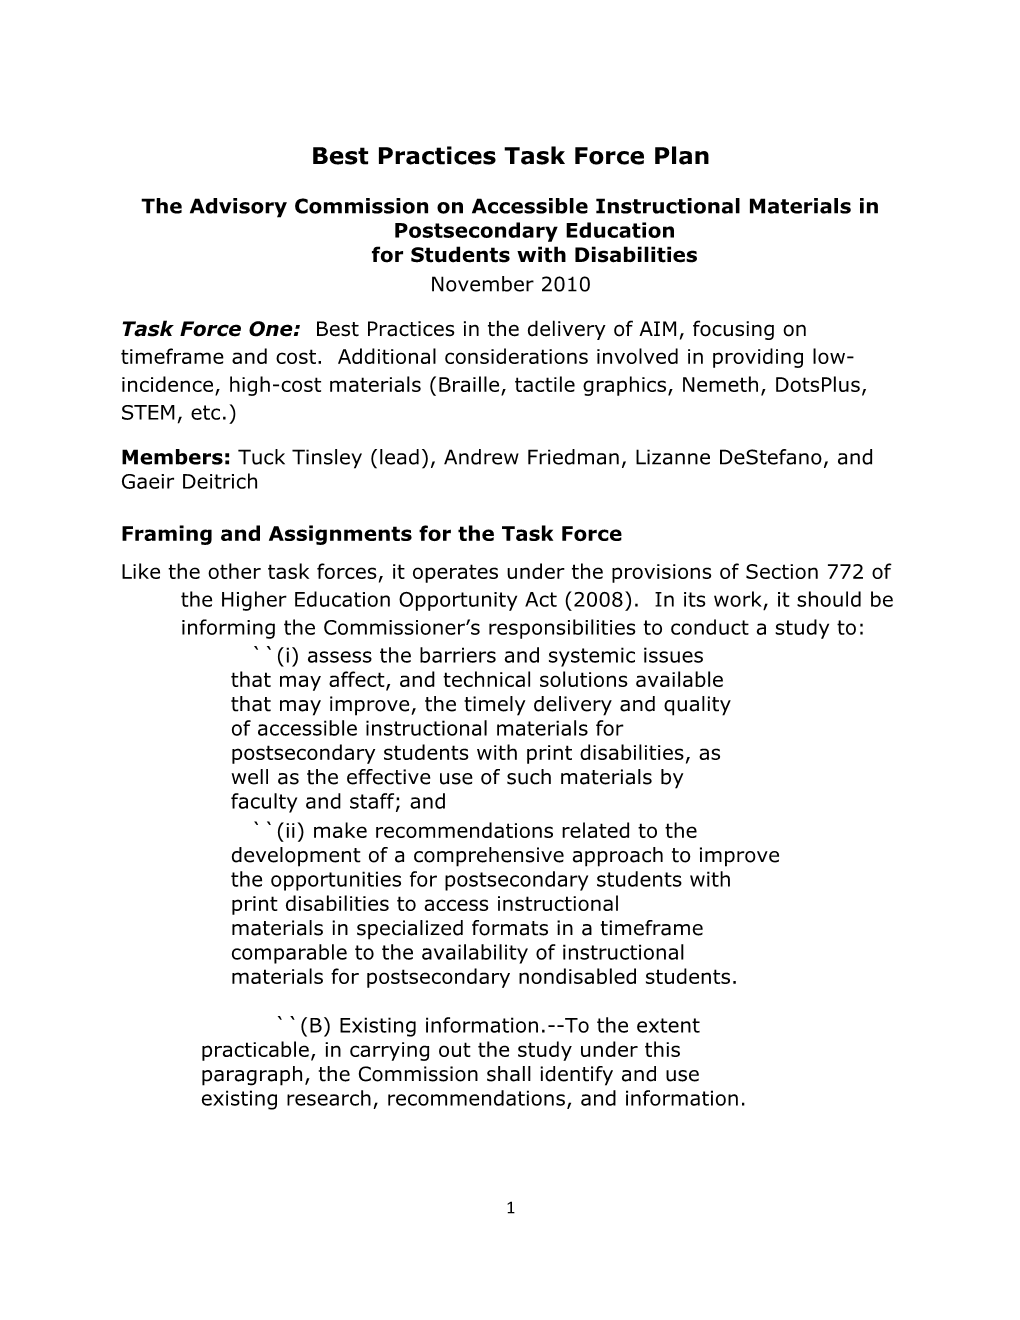 Best Practices Task Force Plan (MS Word)